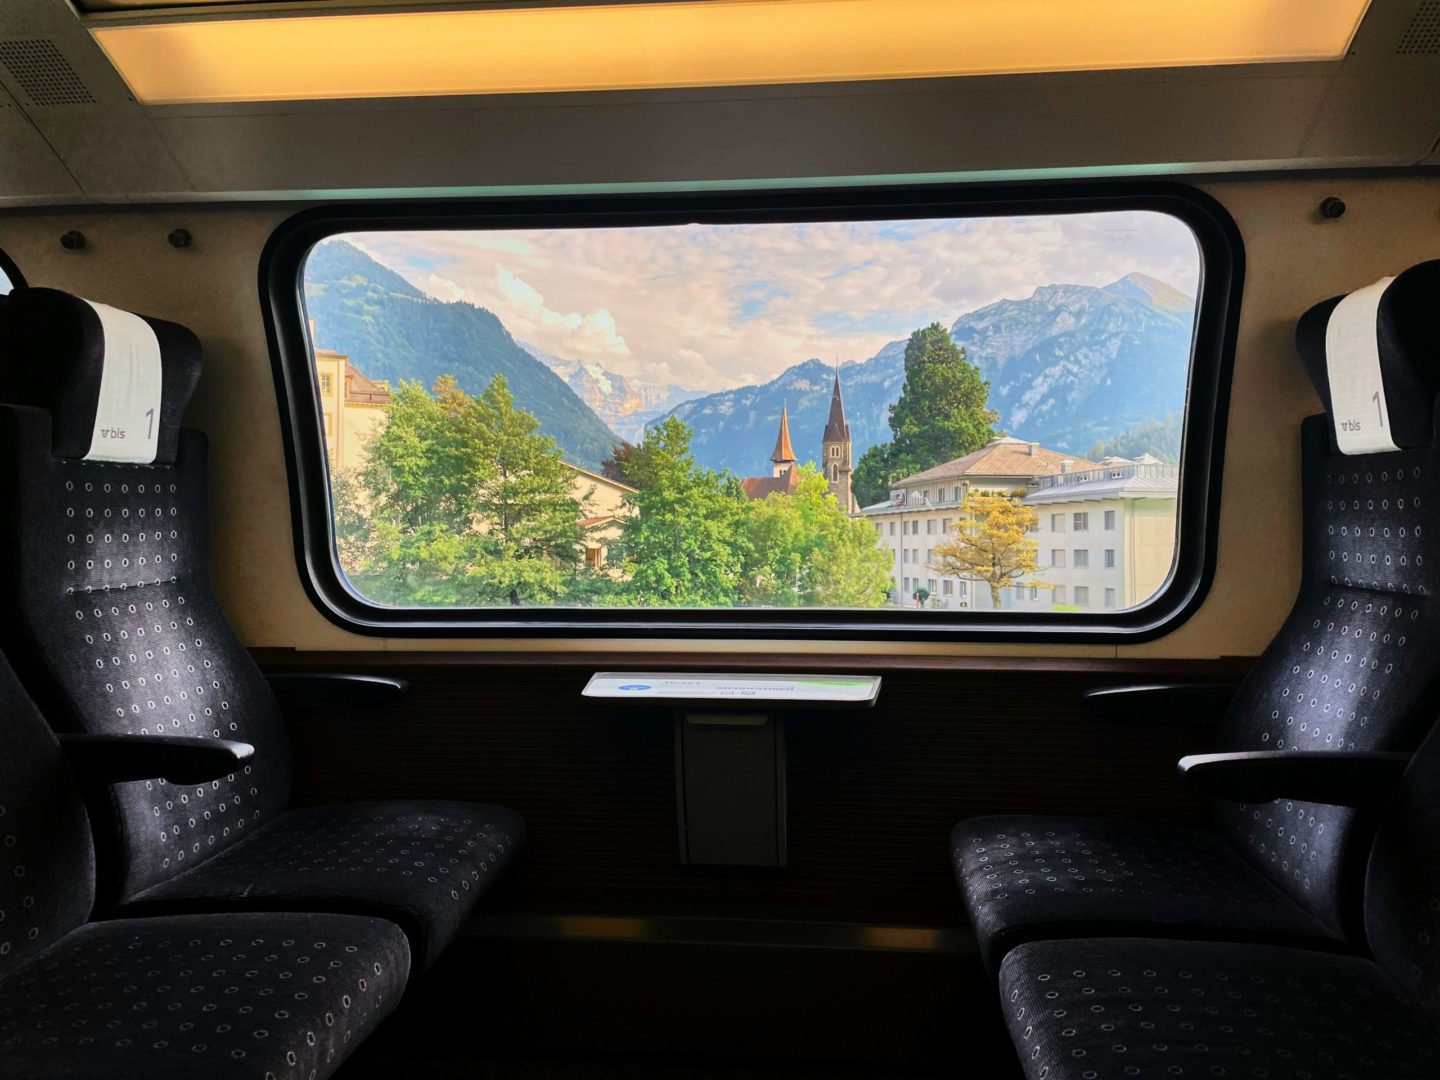 Spectacular view from the train en route to Interlaken, Switzerland